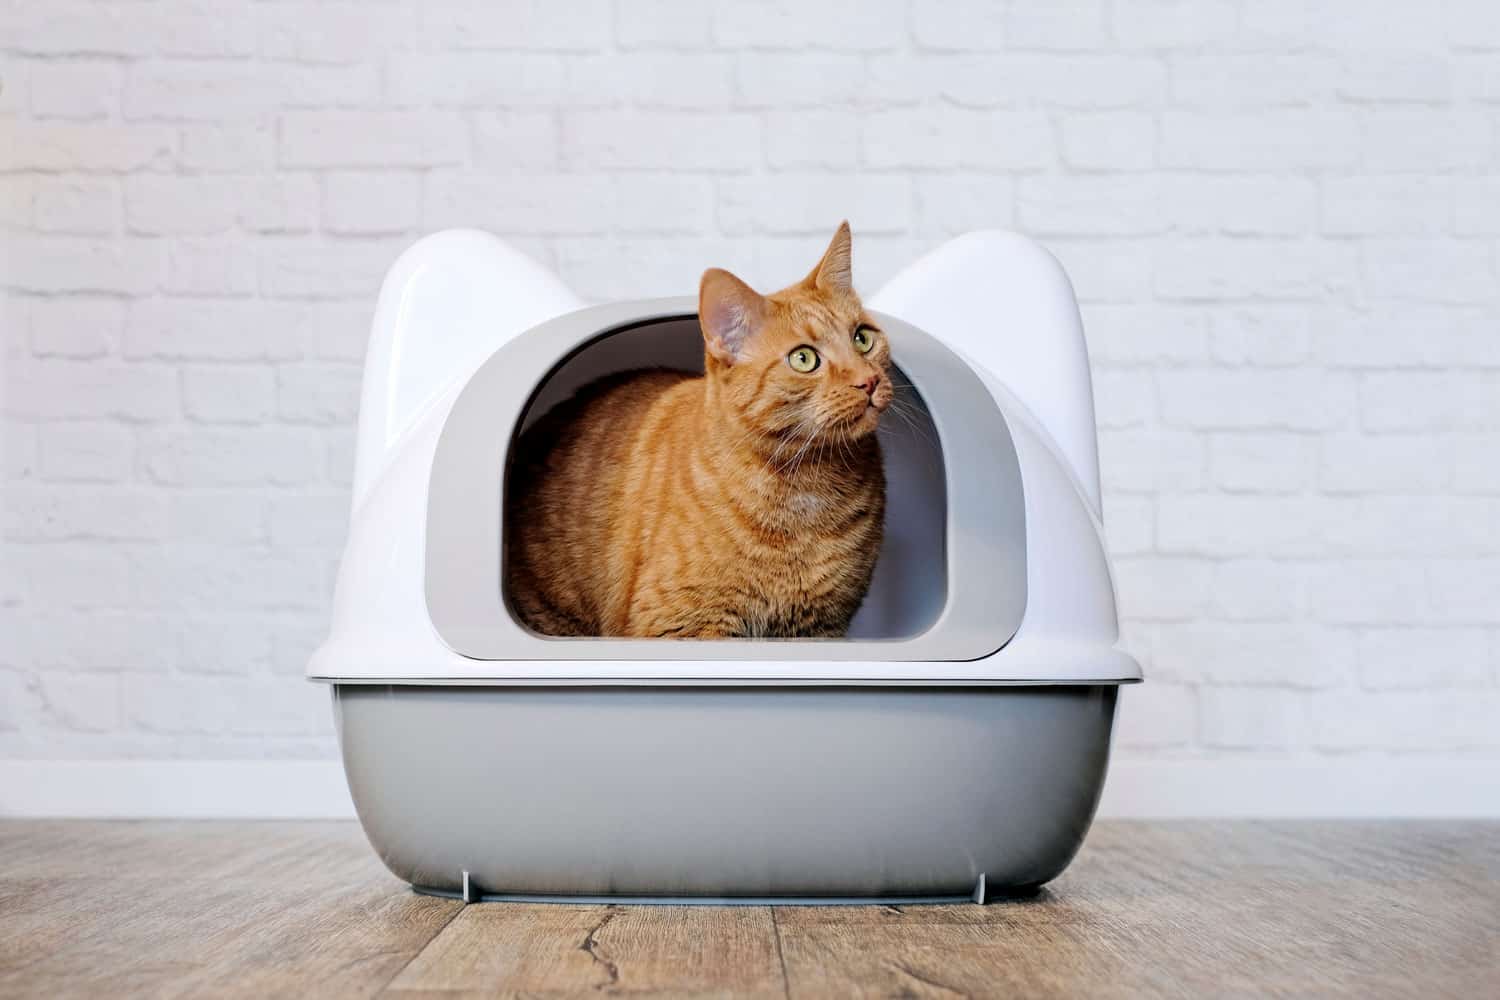 Cute happy ginger cat sitting in a litter box and looking sideways.